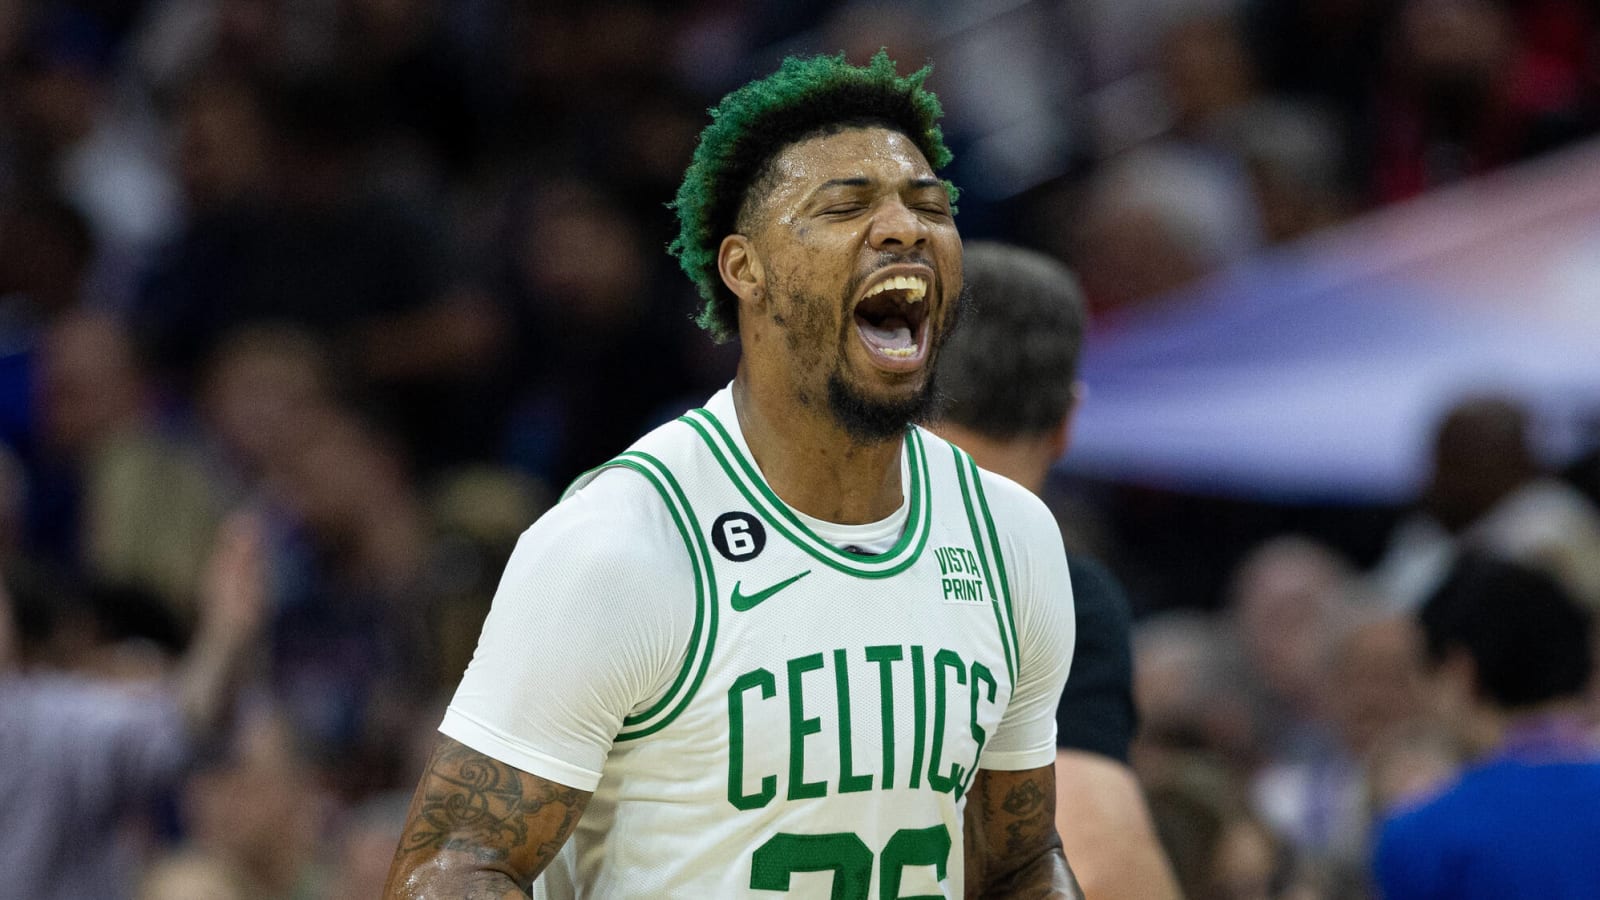 Hall of Famer questions decision to trade Marcus Smart